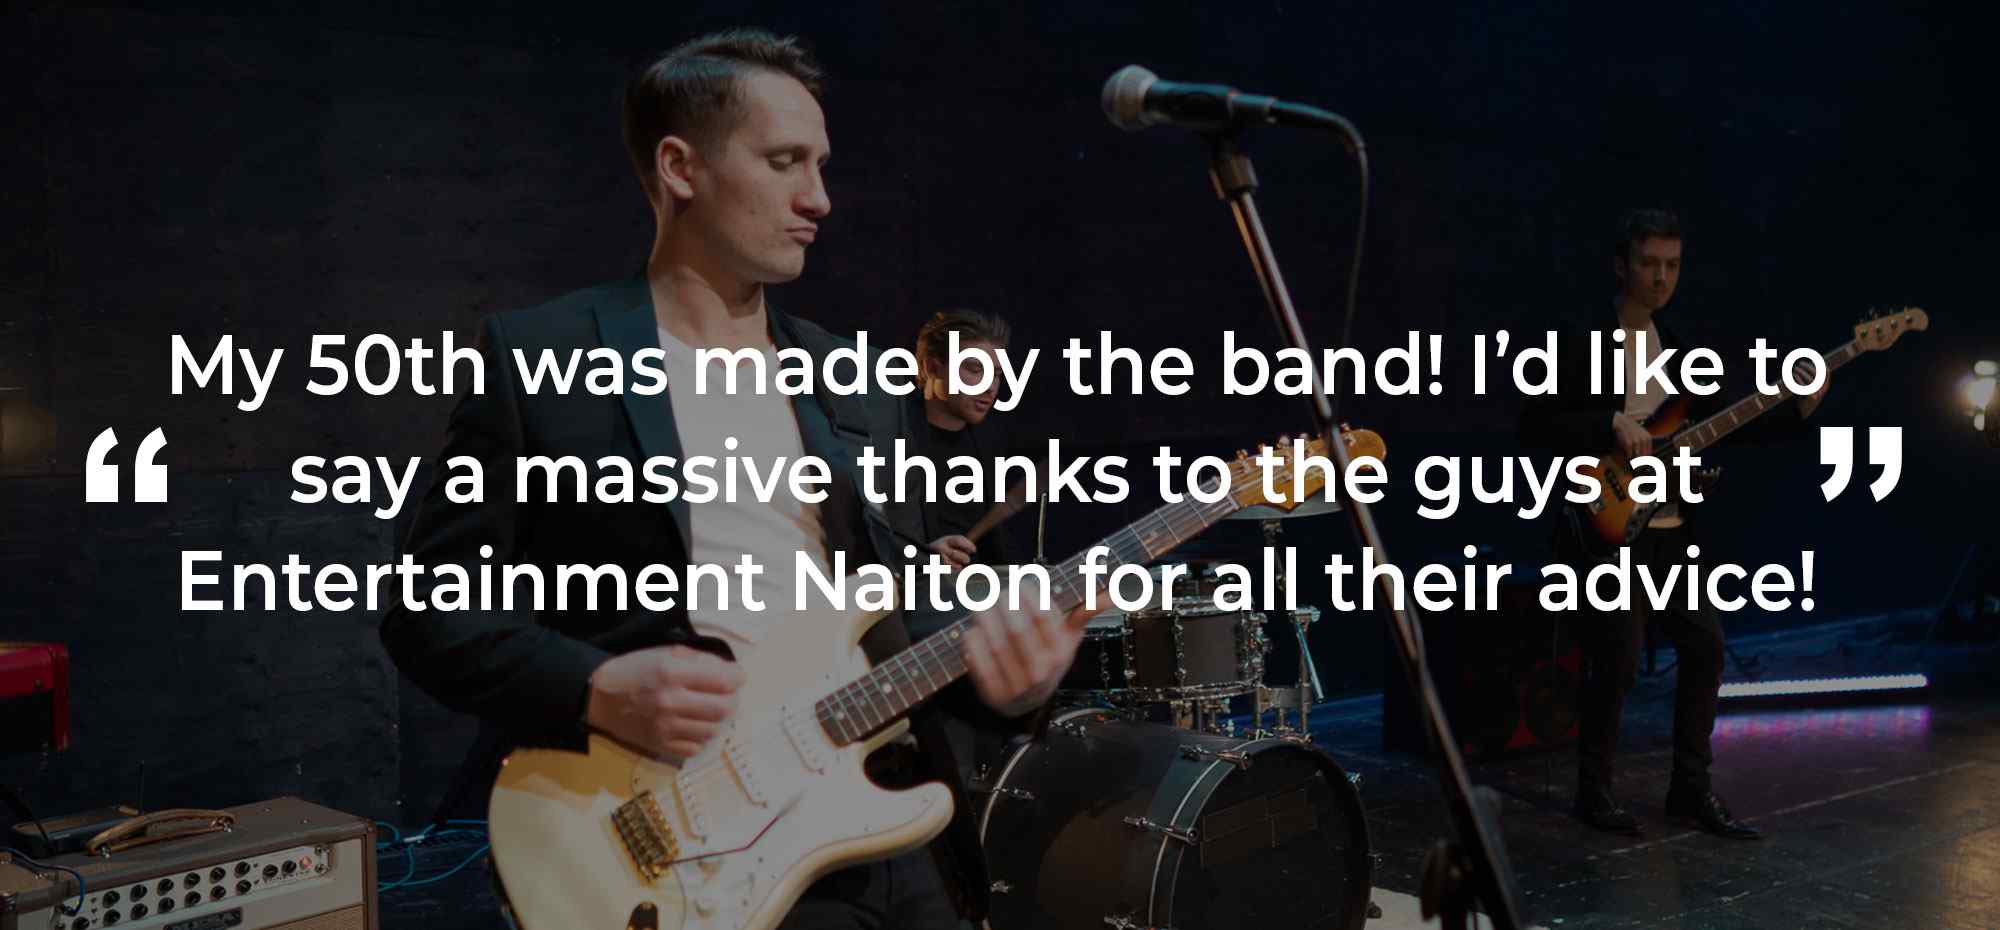 Client Review of a Party Band Worcestershire